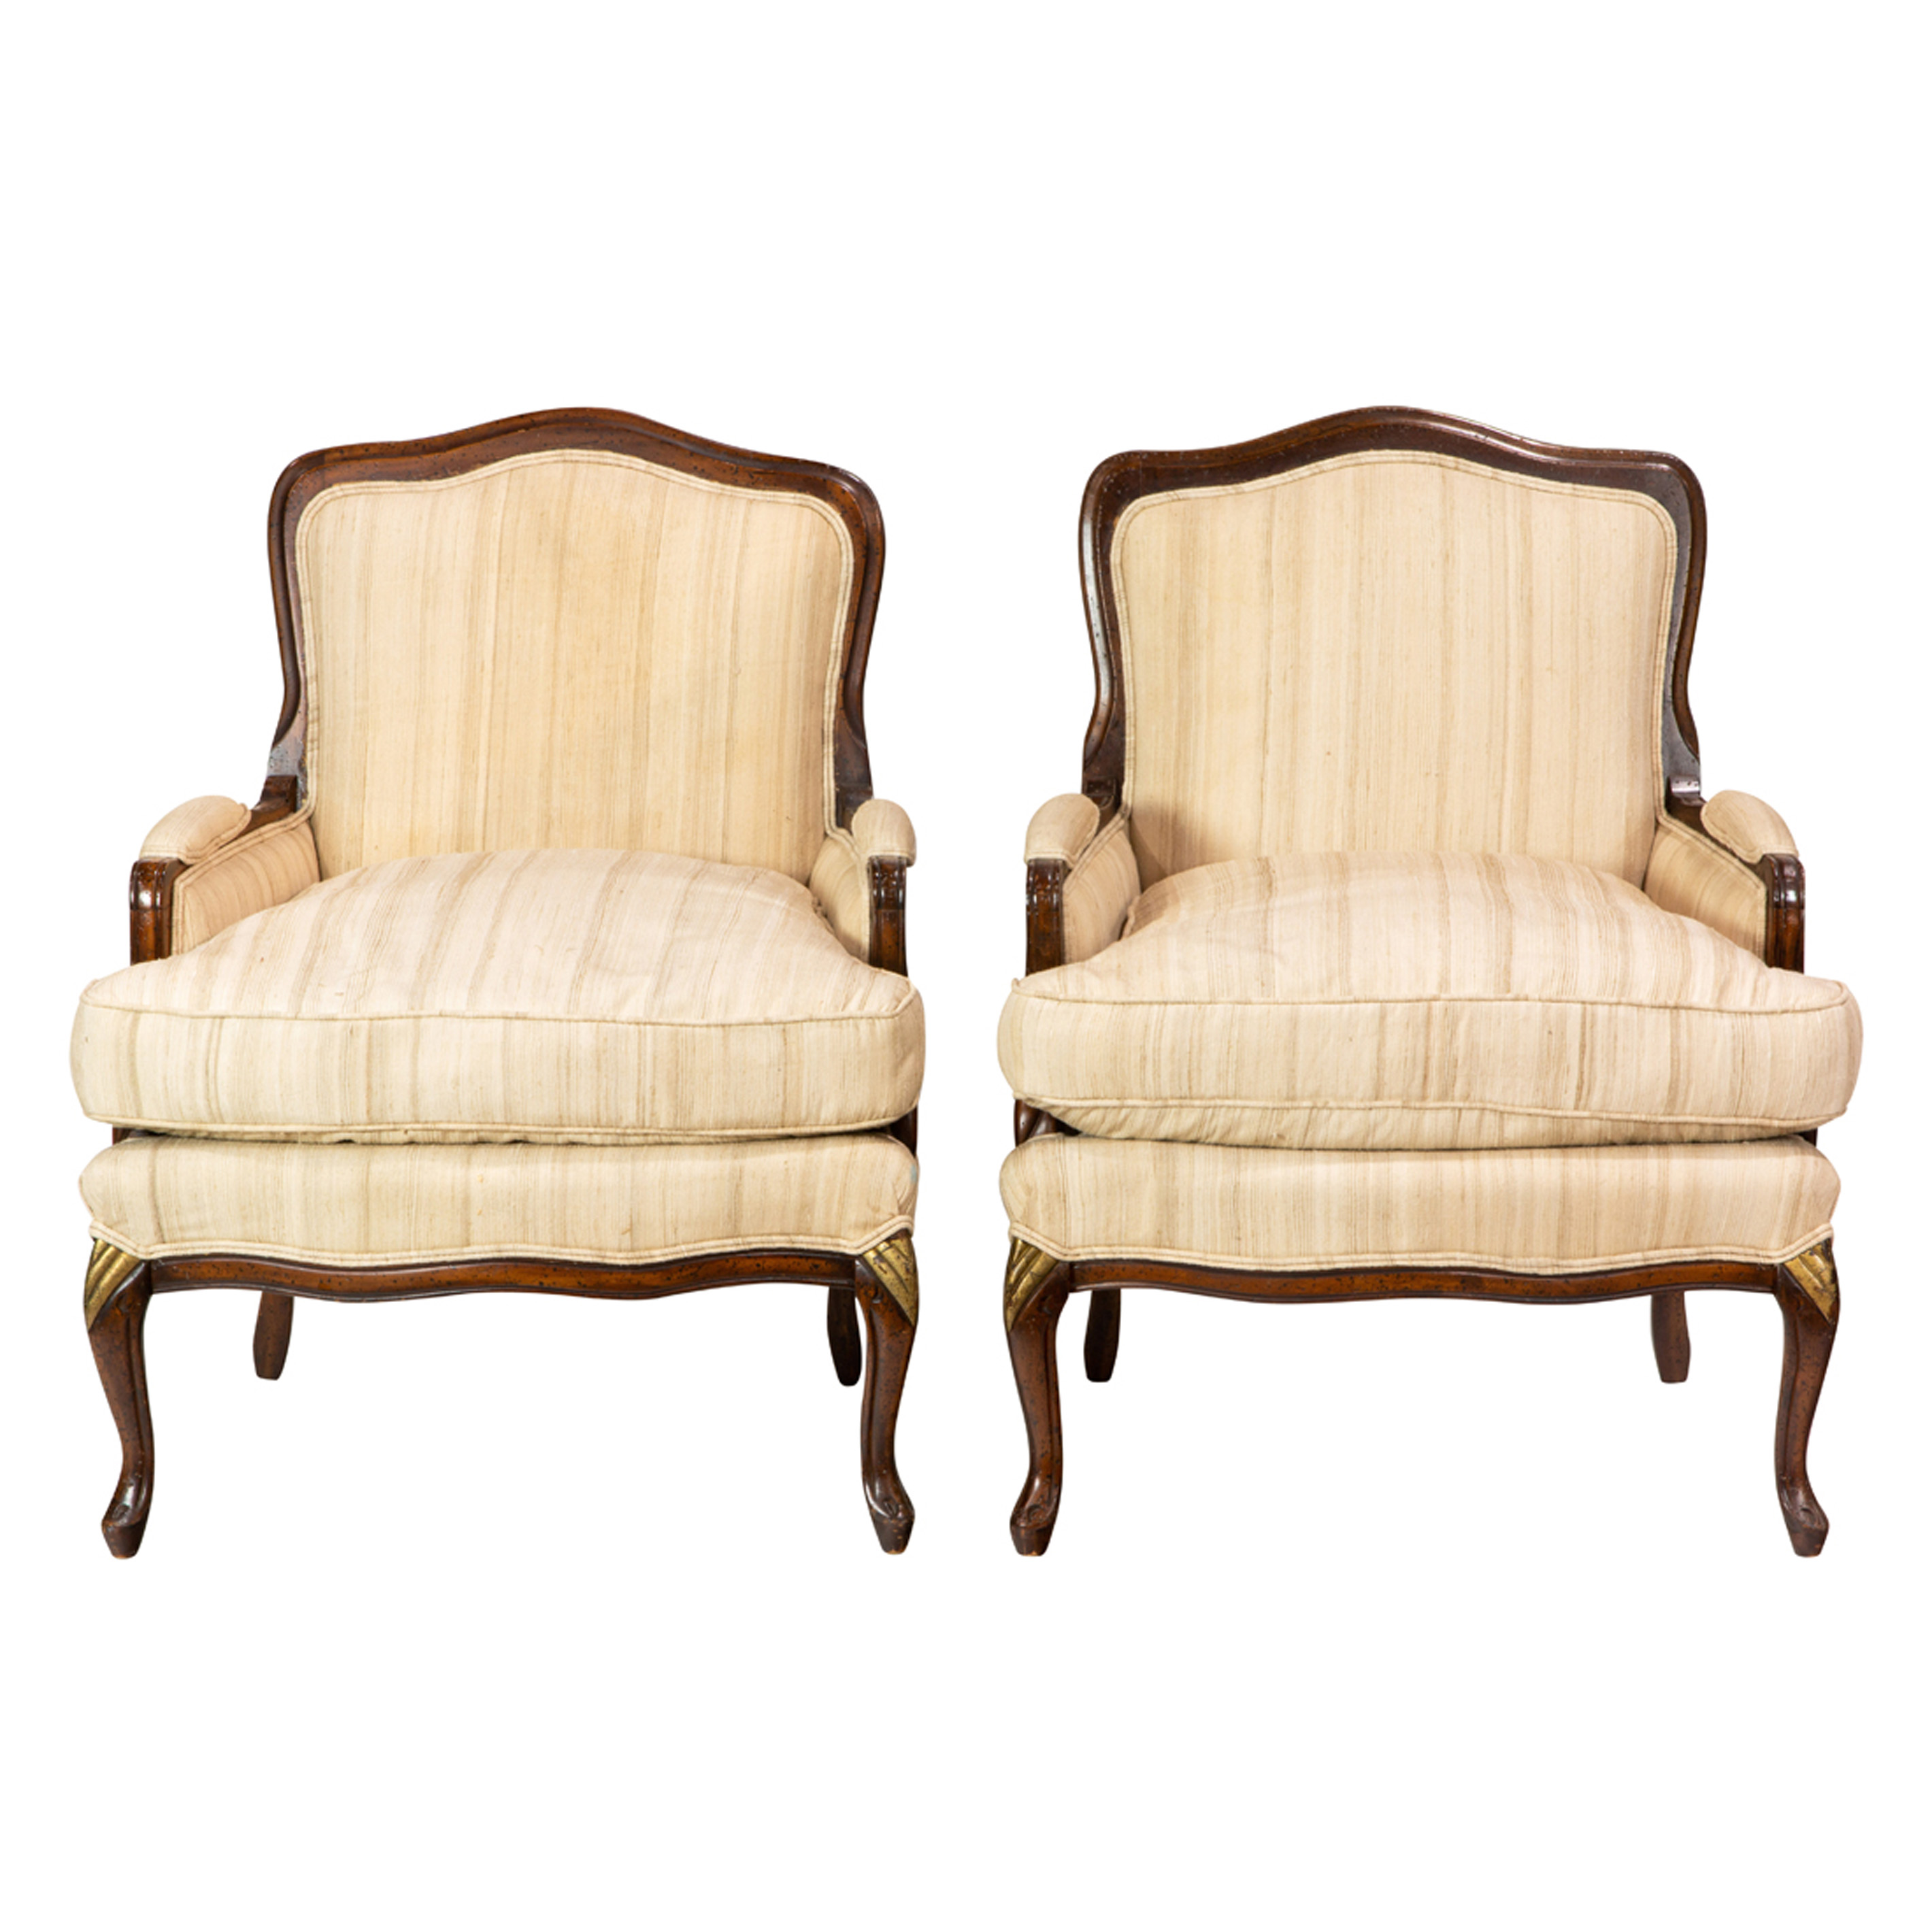 A PAIR OF LOUIS XV STYLE BERGERES